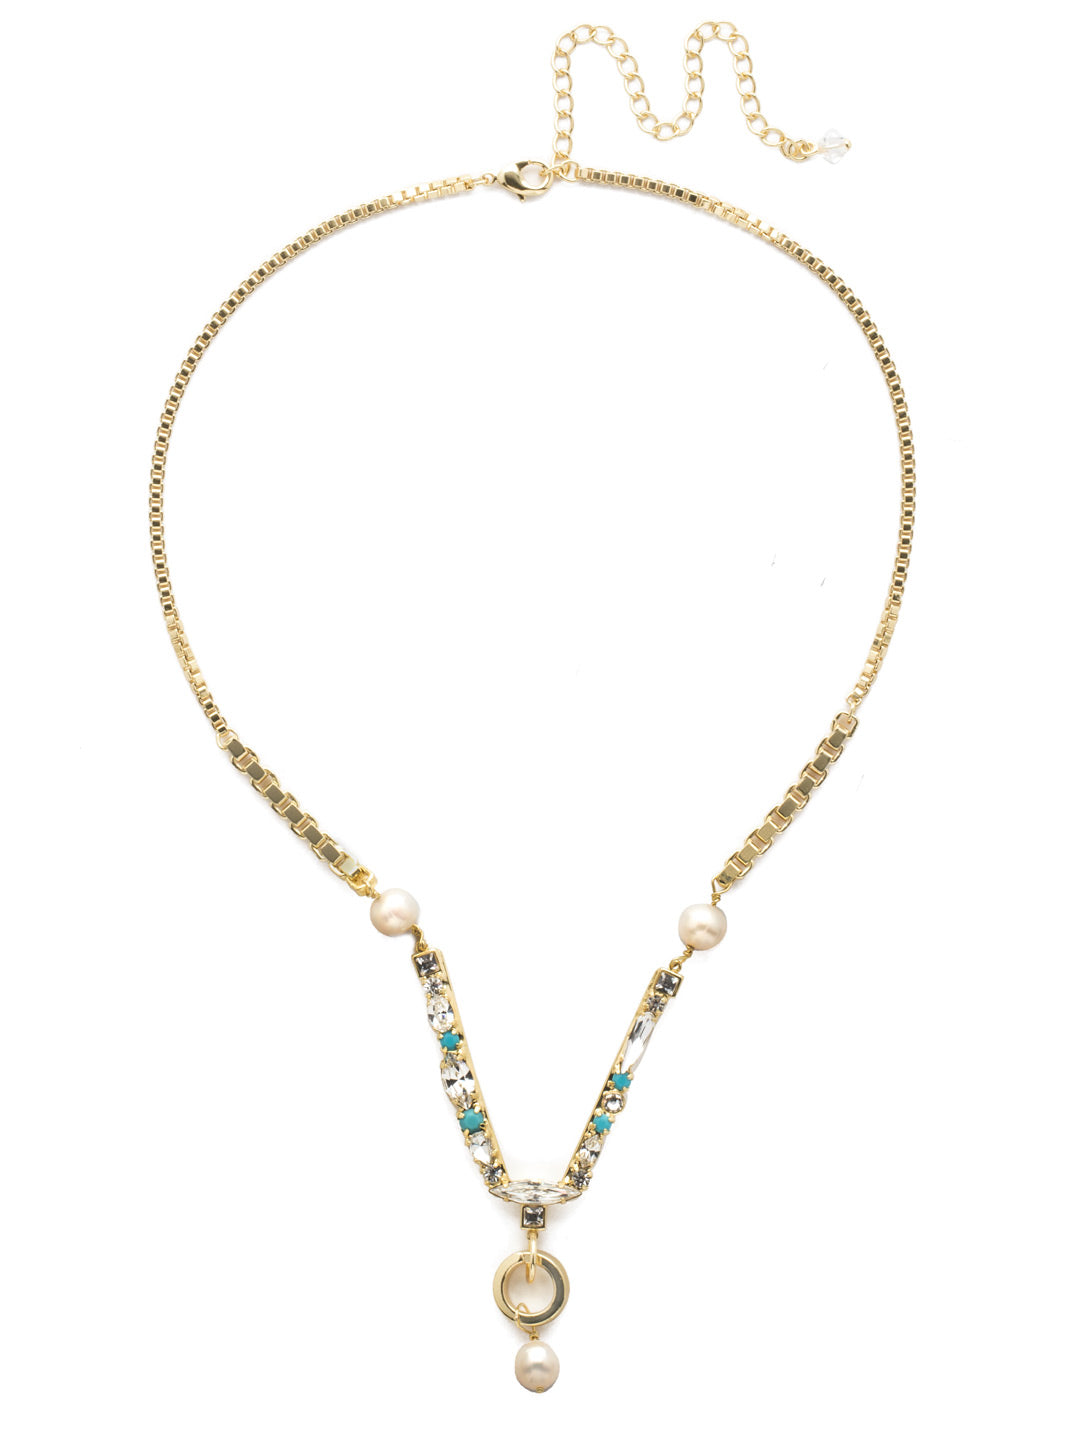 Aryana Necklace - NEC6BGPLP - <p>A modern must-have! This classic line necklace showcases a geometric design with unique box chain and a central structured crystal element. Finished by a metal circle charm. From Sorrelli's Polished Pearl collection in our Bright Gold-tone finish.</p>